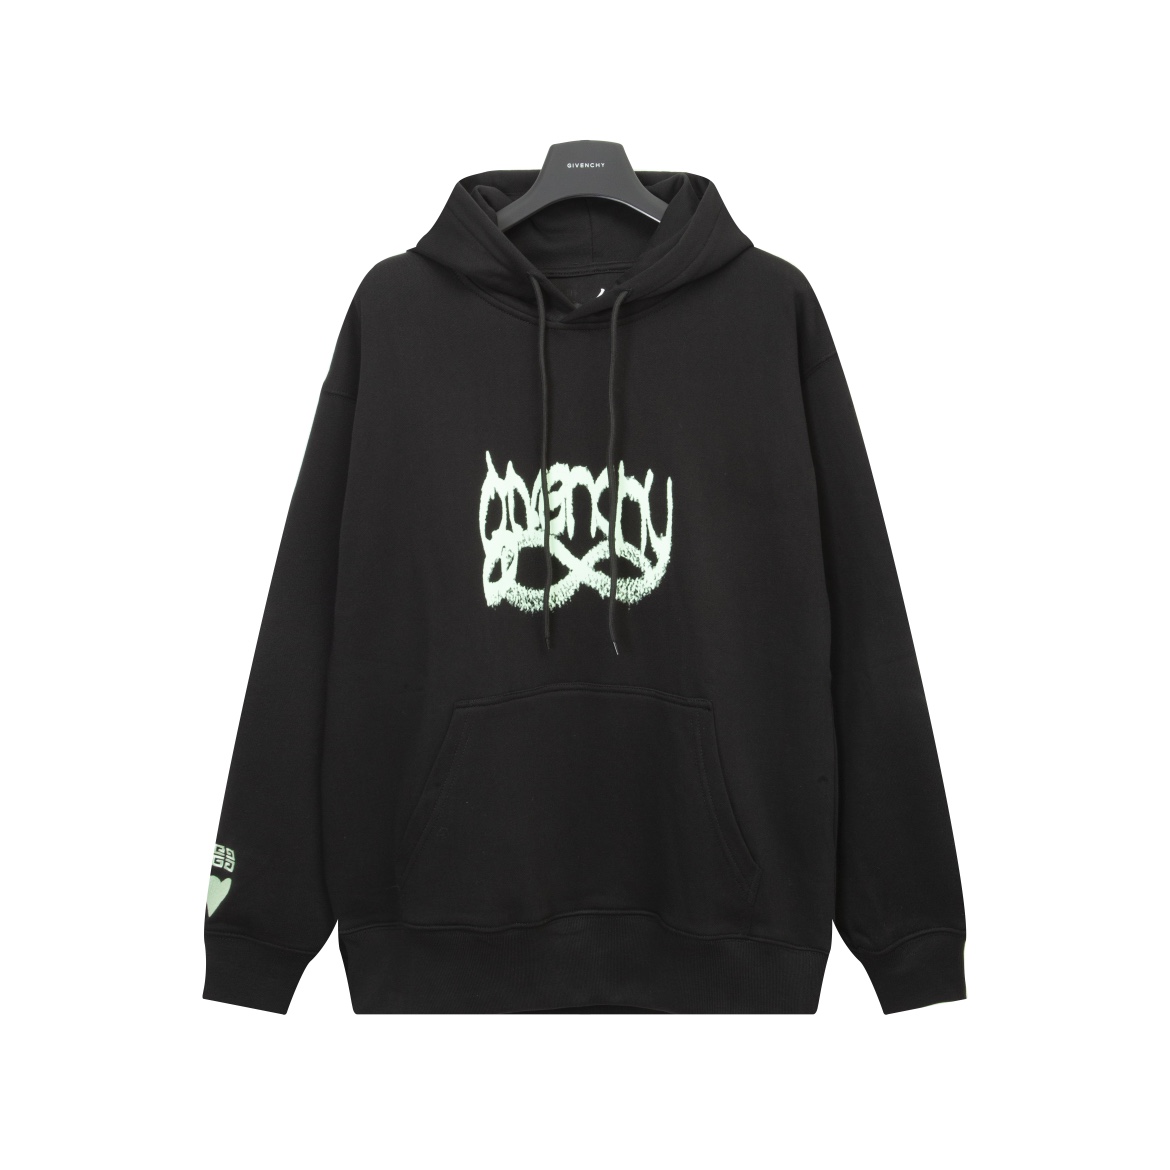 Givenchy Clothing Hoodies Black Doodle Printing Cotton Hooded Top